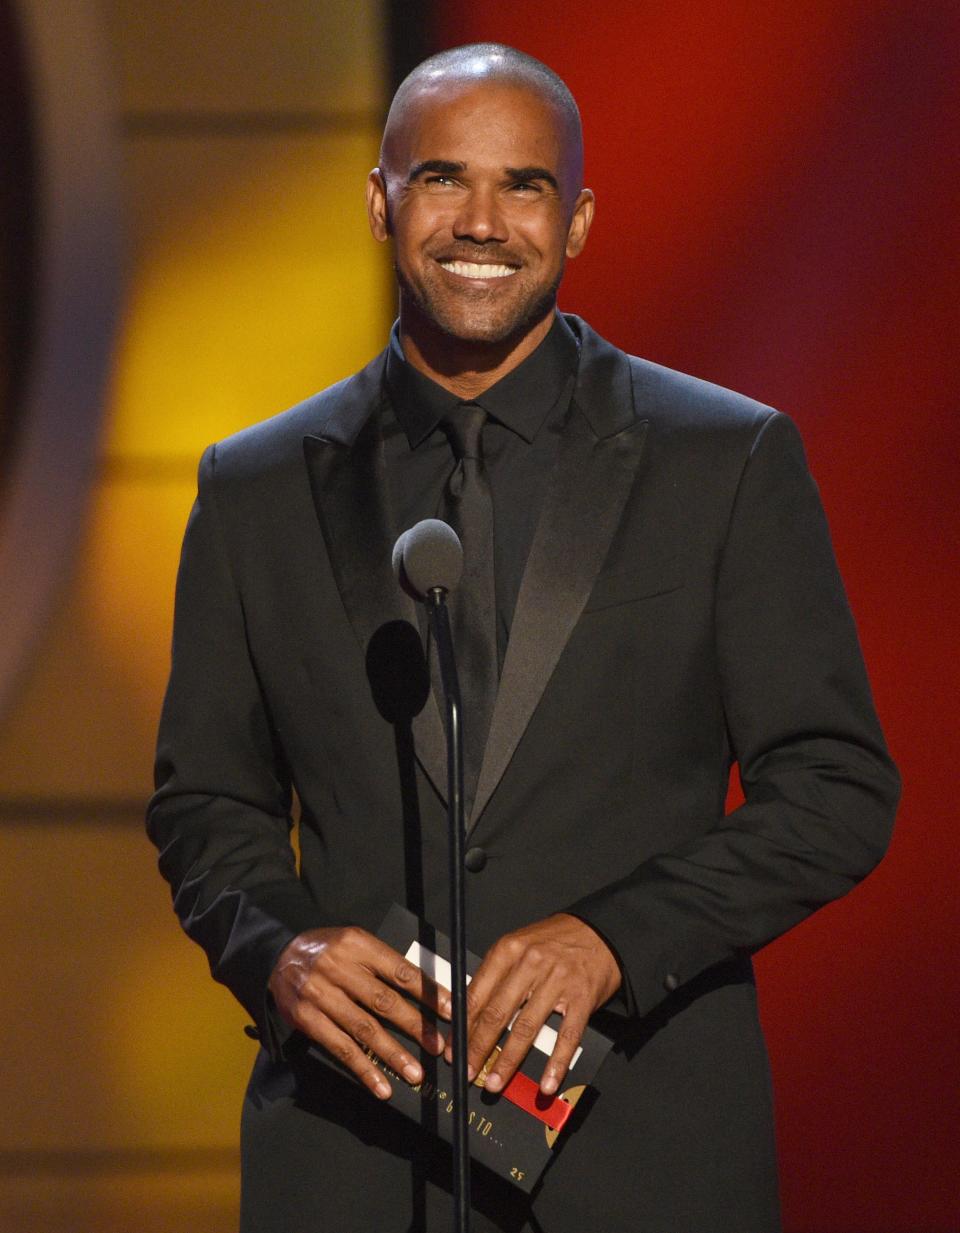 Shemar Moore is expecting his first child in February 2023.